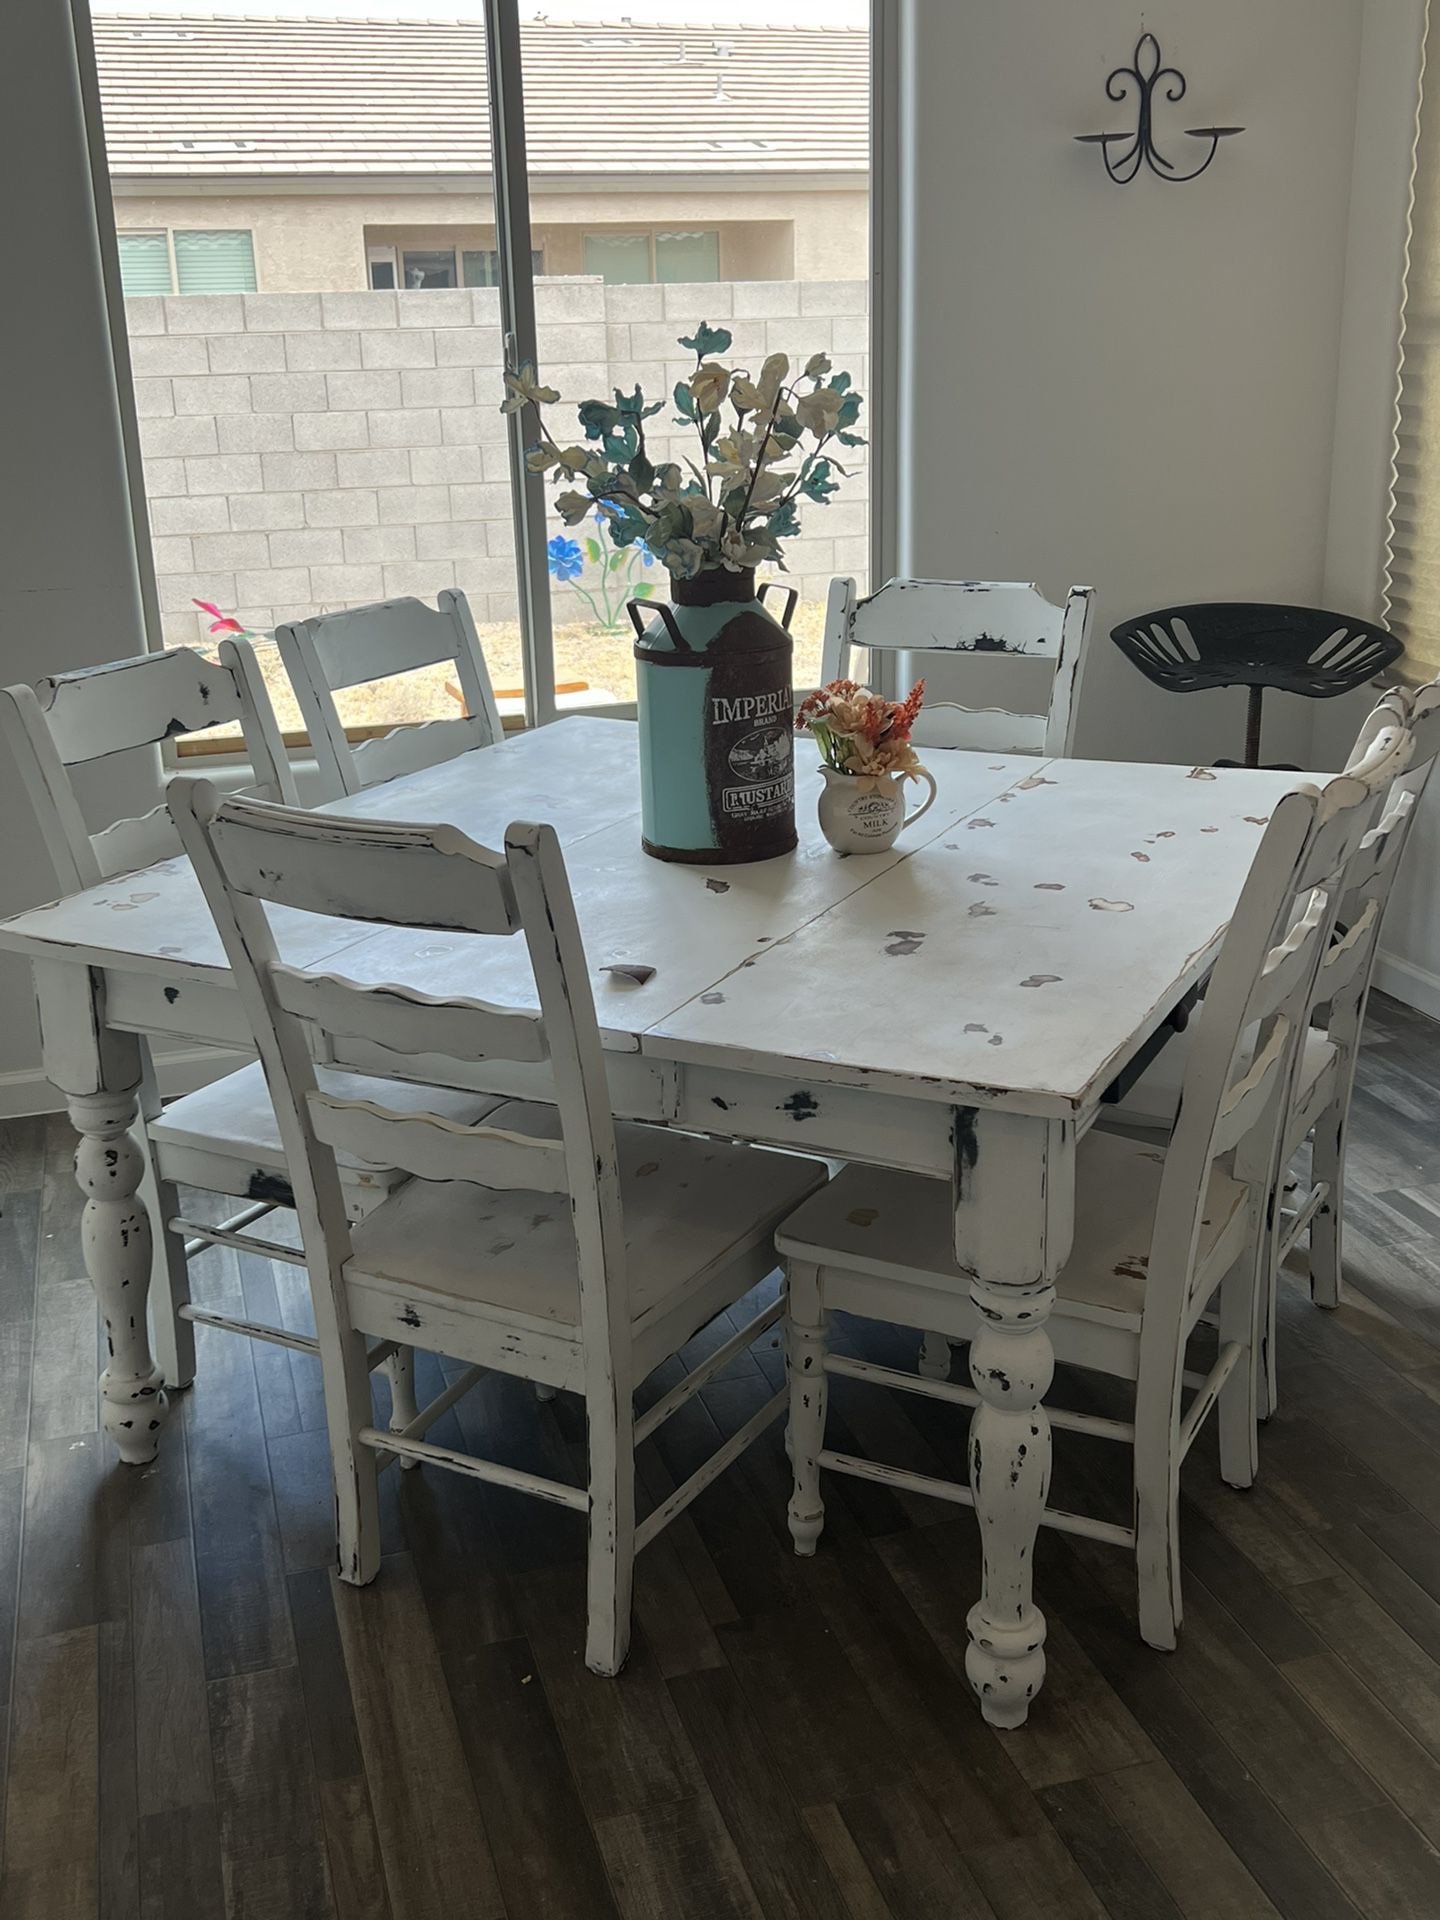 Farmhouse, Shabby Chic, Distressed Dining Table Seats Up To 8